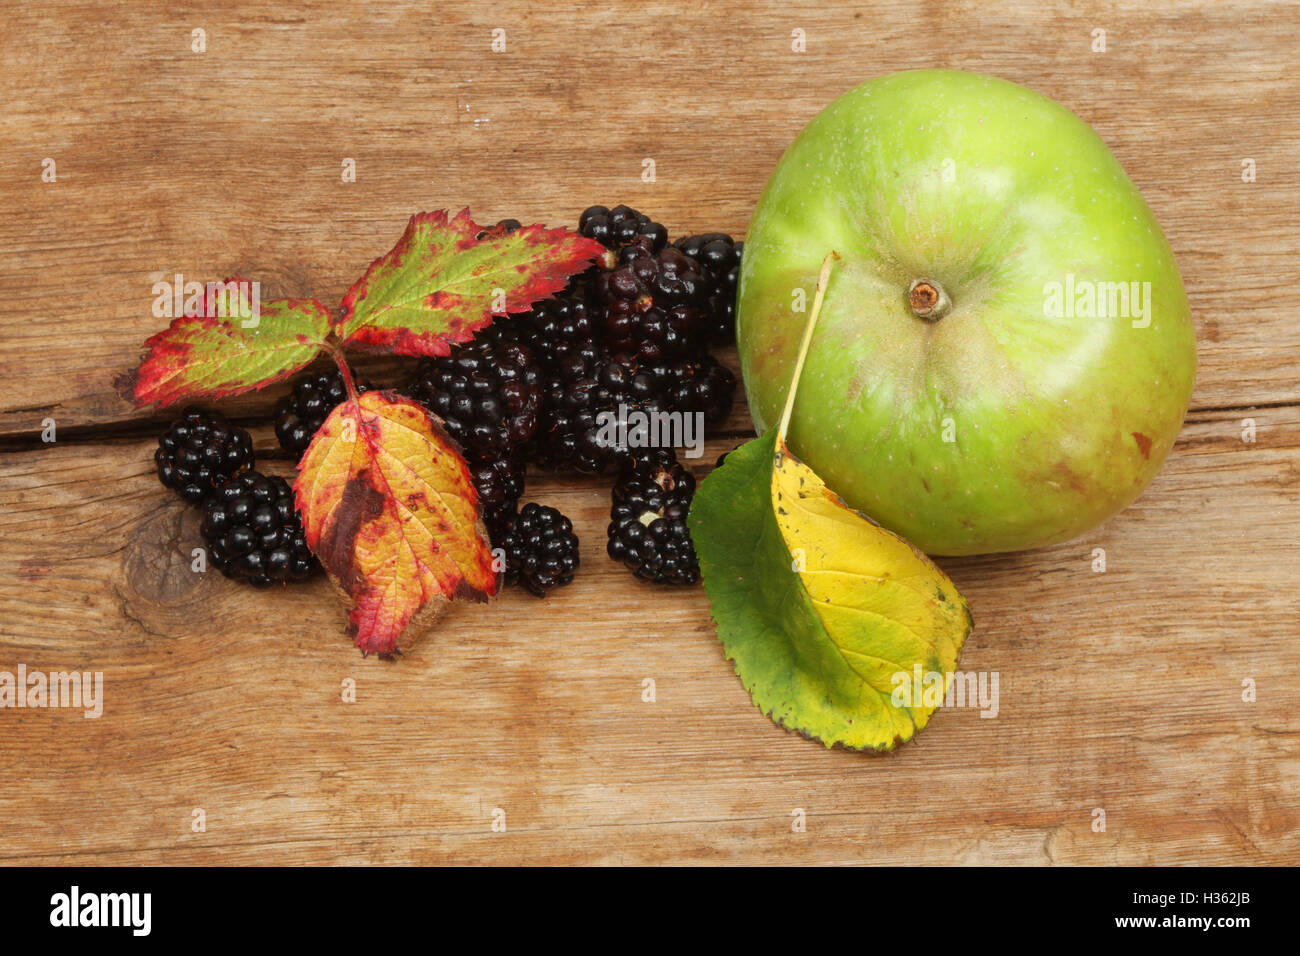 Blackberries and a cooking apple with Autumnal leaves on rustic wood Stock Photo